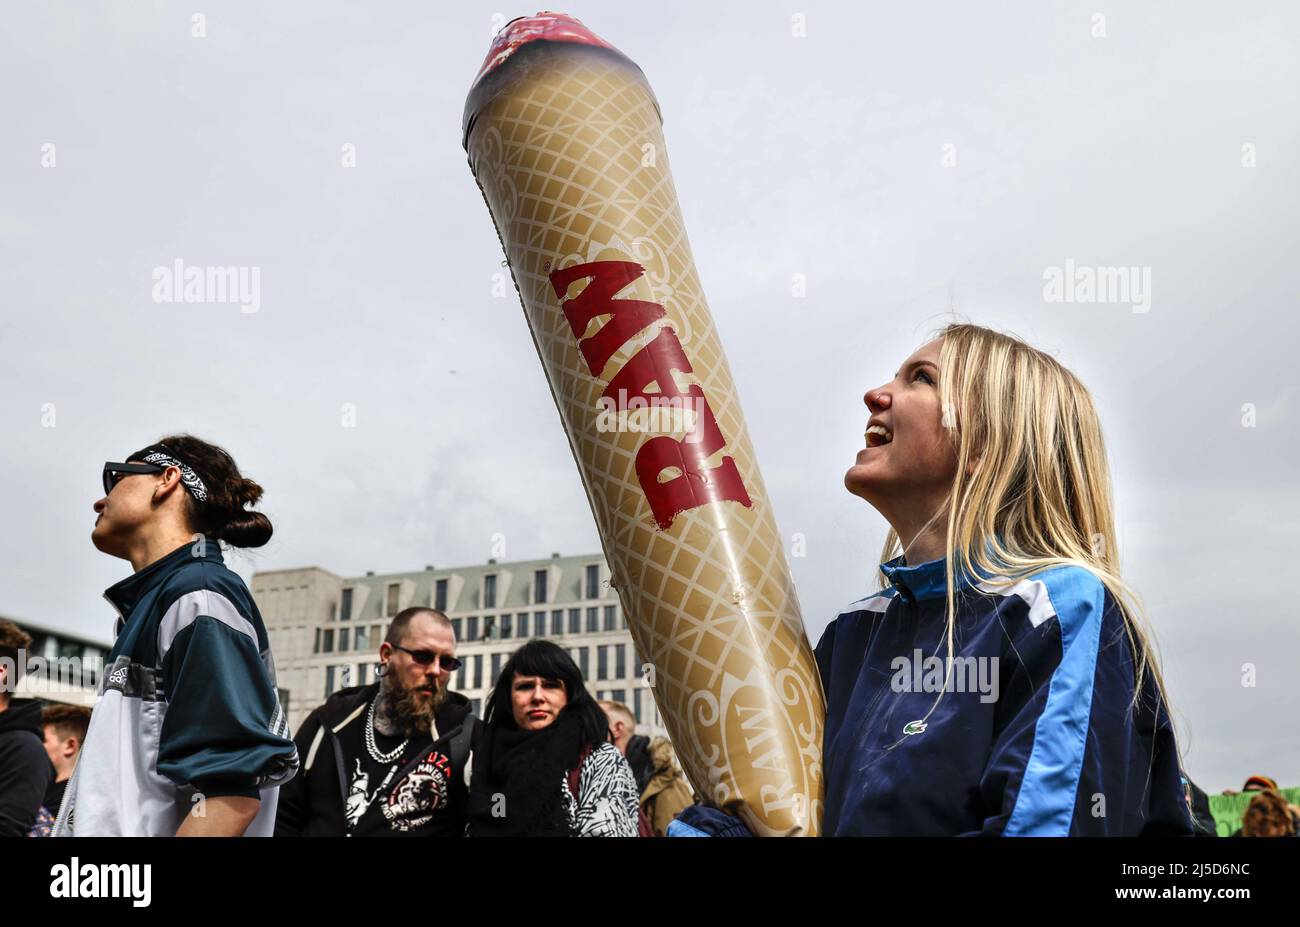 Berlin, April 20, 2020 - A woman holds a model of a giant joint during a demonstration in Berlin on April 20, the worldwide day of action for legal marijuana use. The demonstrators demand legalization and immediate decriminalization of cannabis users in Germany. [automated translation] Stock Photo